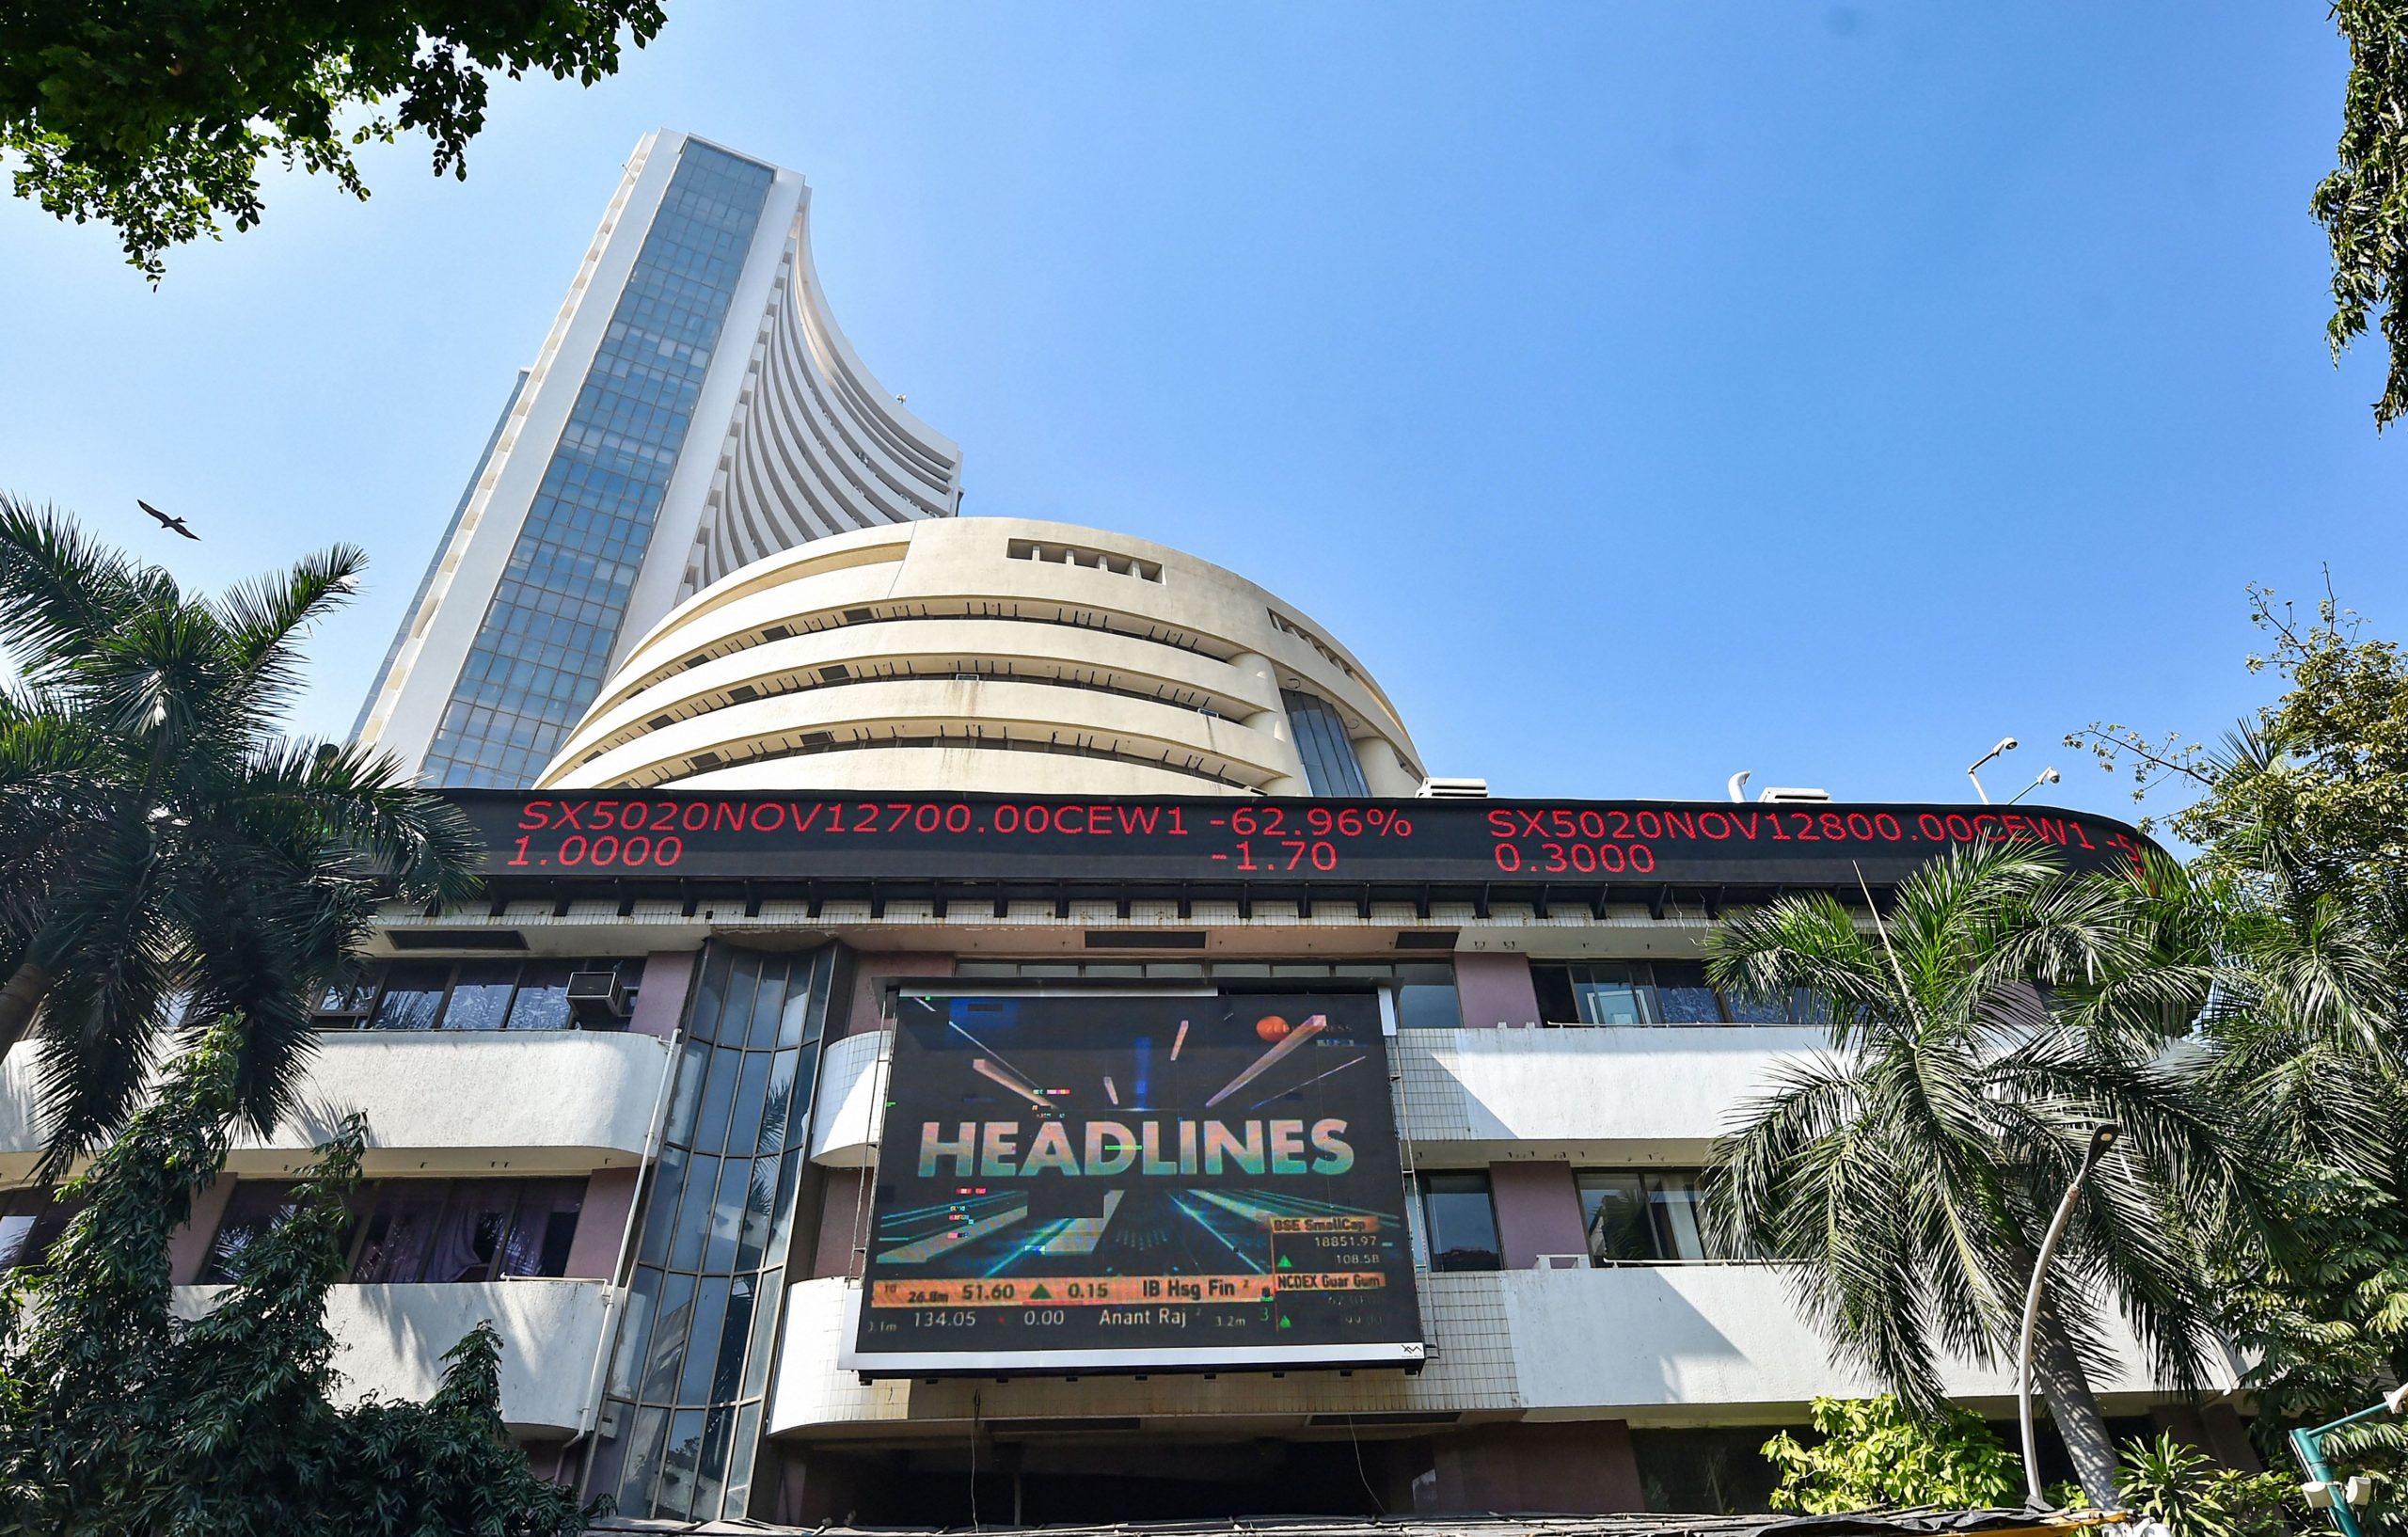 Trending Stocks:  Adani Ports, Tech Mahindra and others in news today